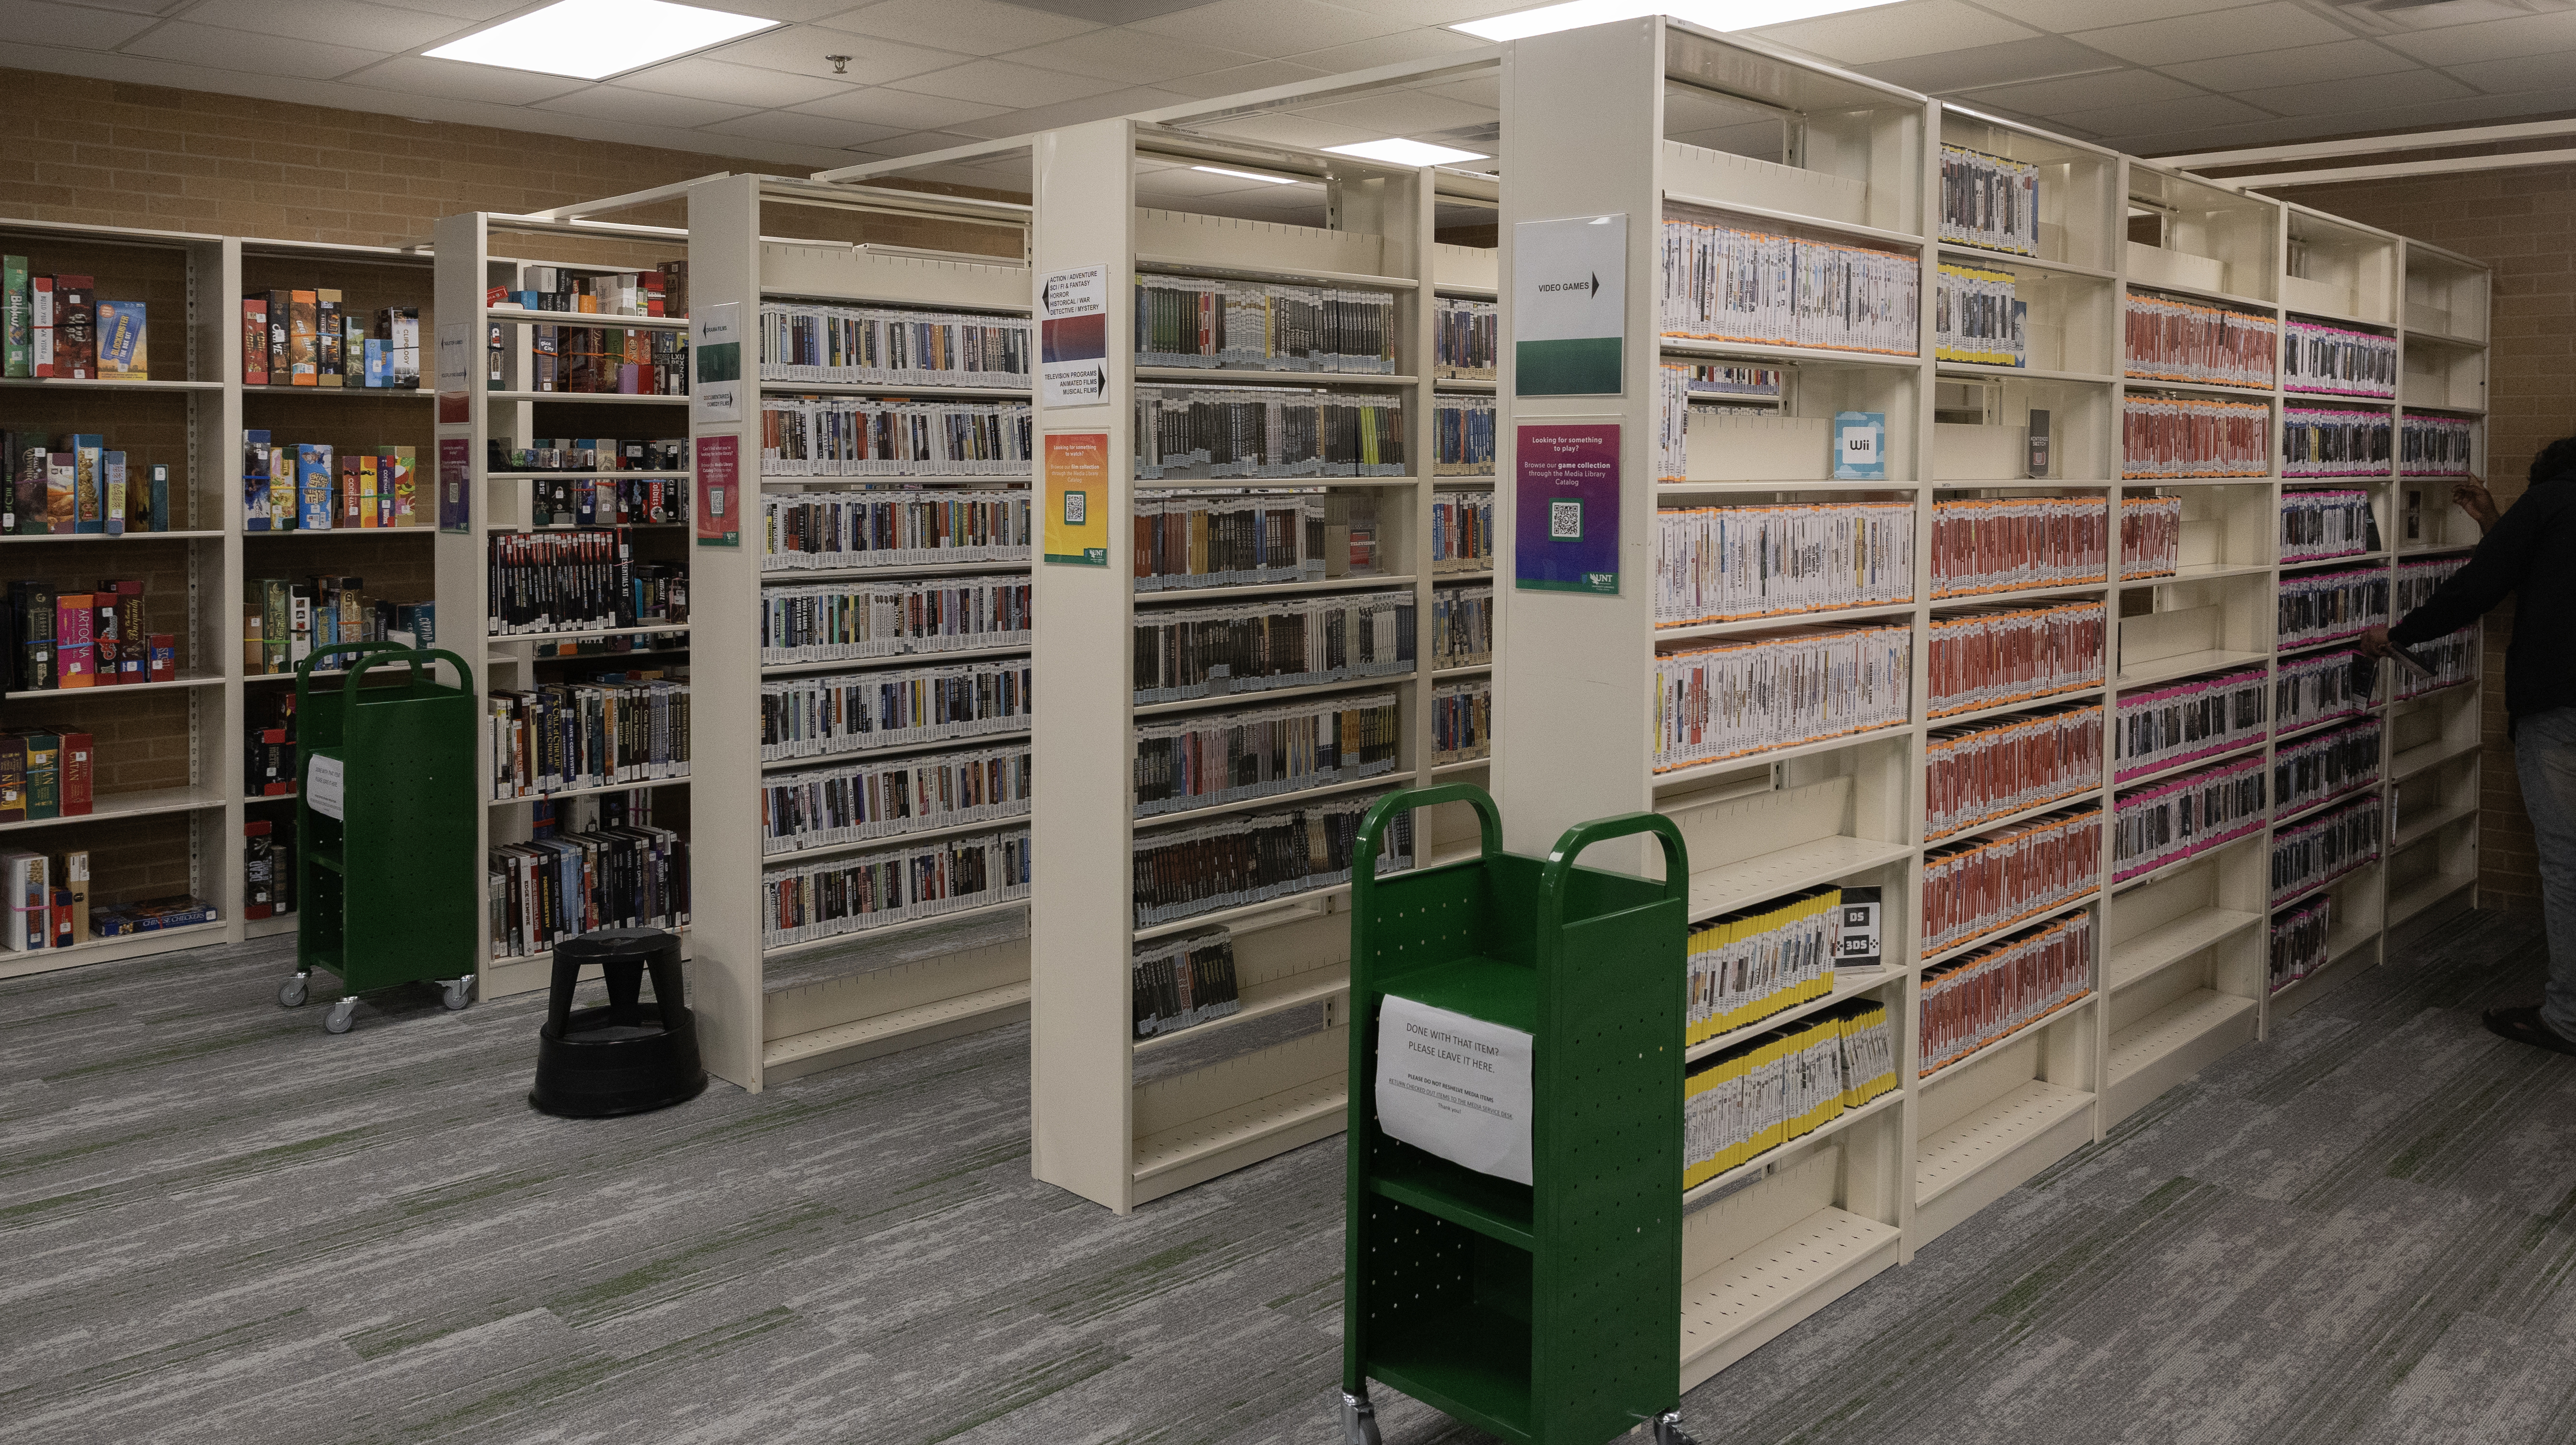 Photos of the Media Library stacks